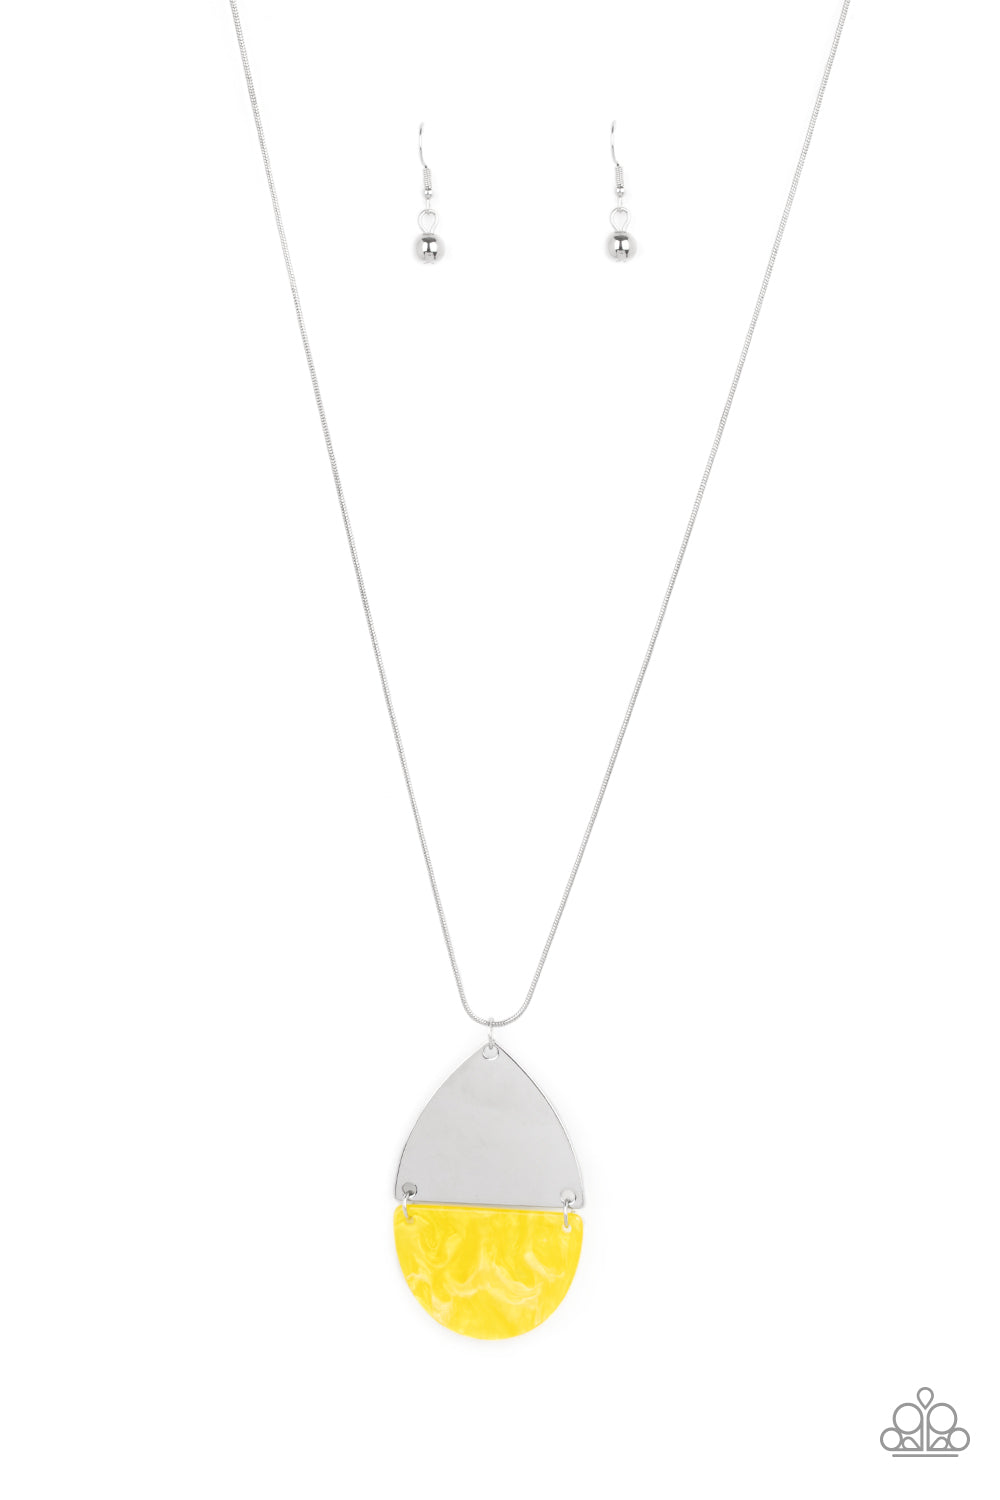 Paparazzi Rainbow Shores - Yellow Necklace - A Finishing Touch Jewelry